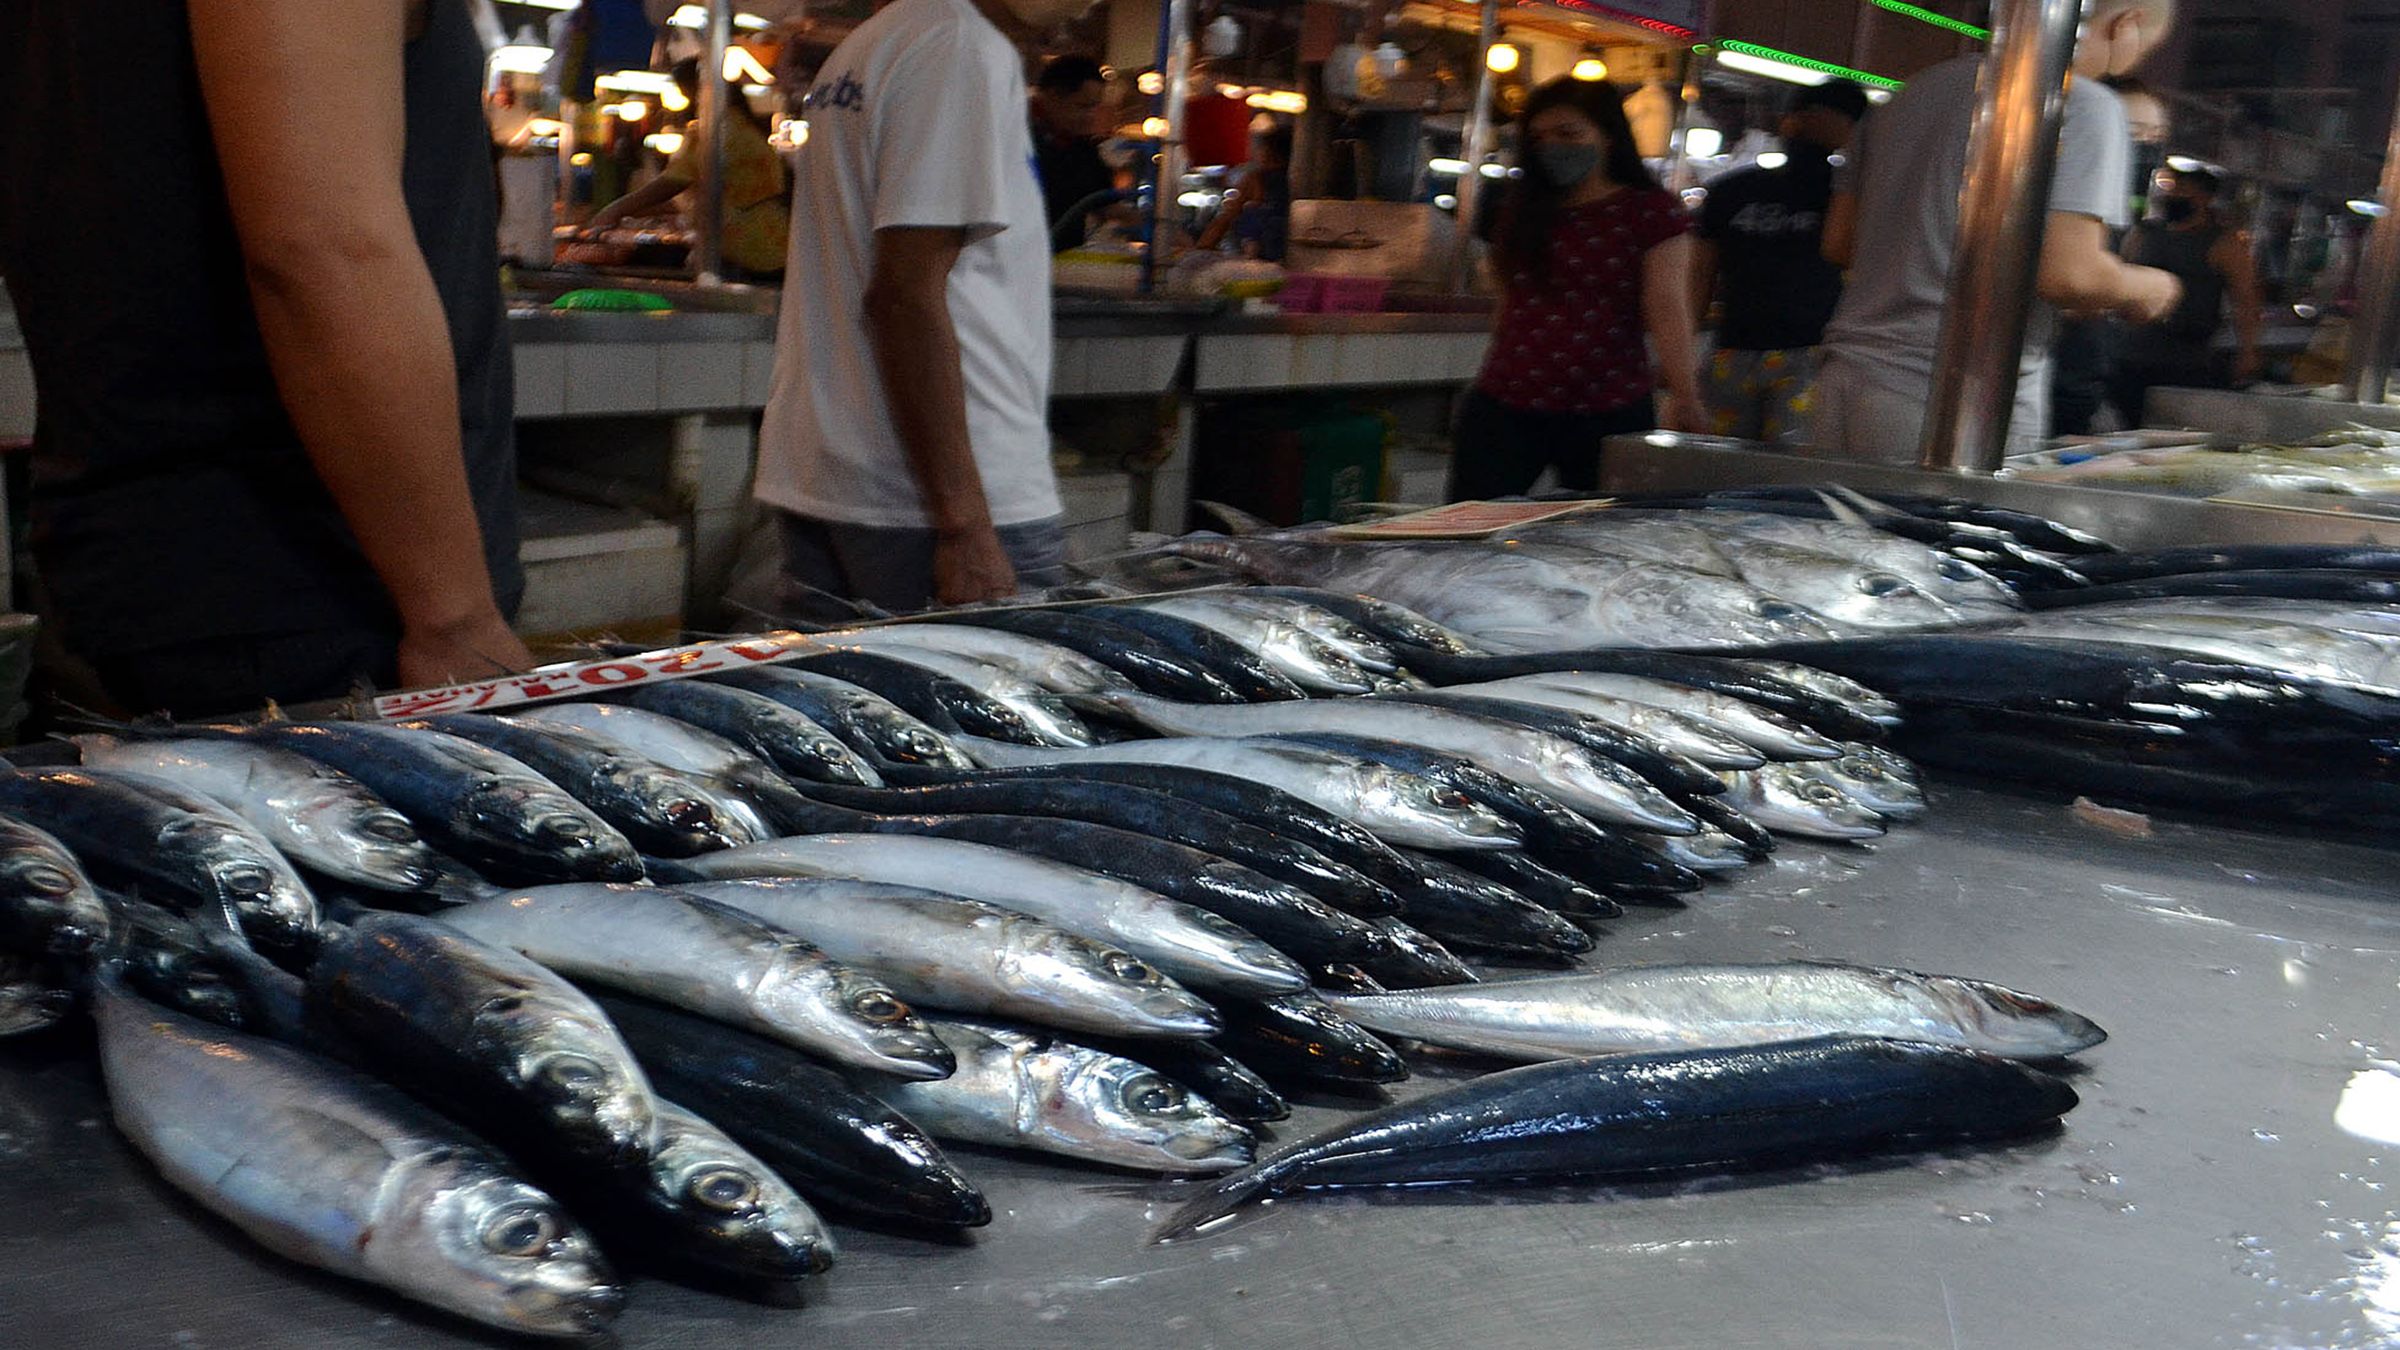 PROHIBITIVE FISH PRICES photo Mike Taboy